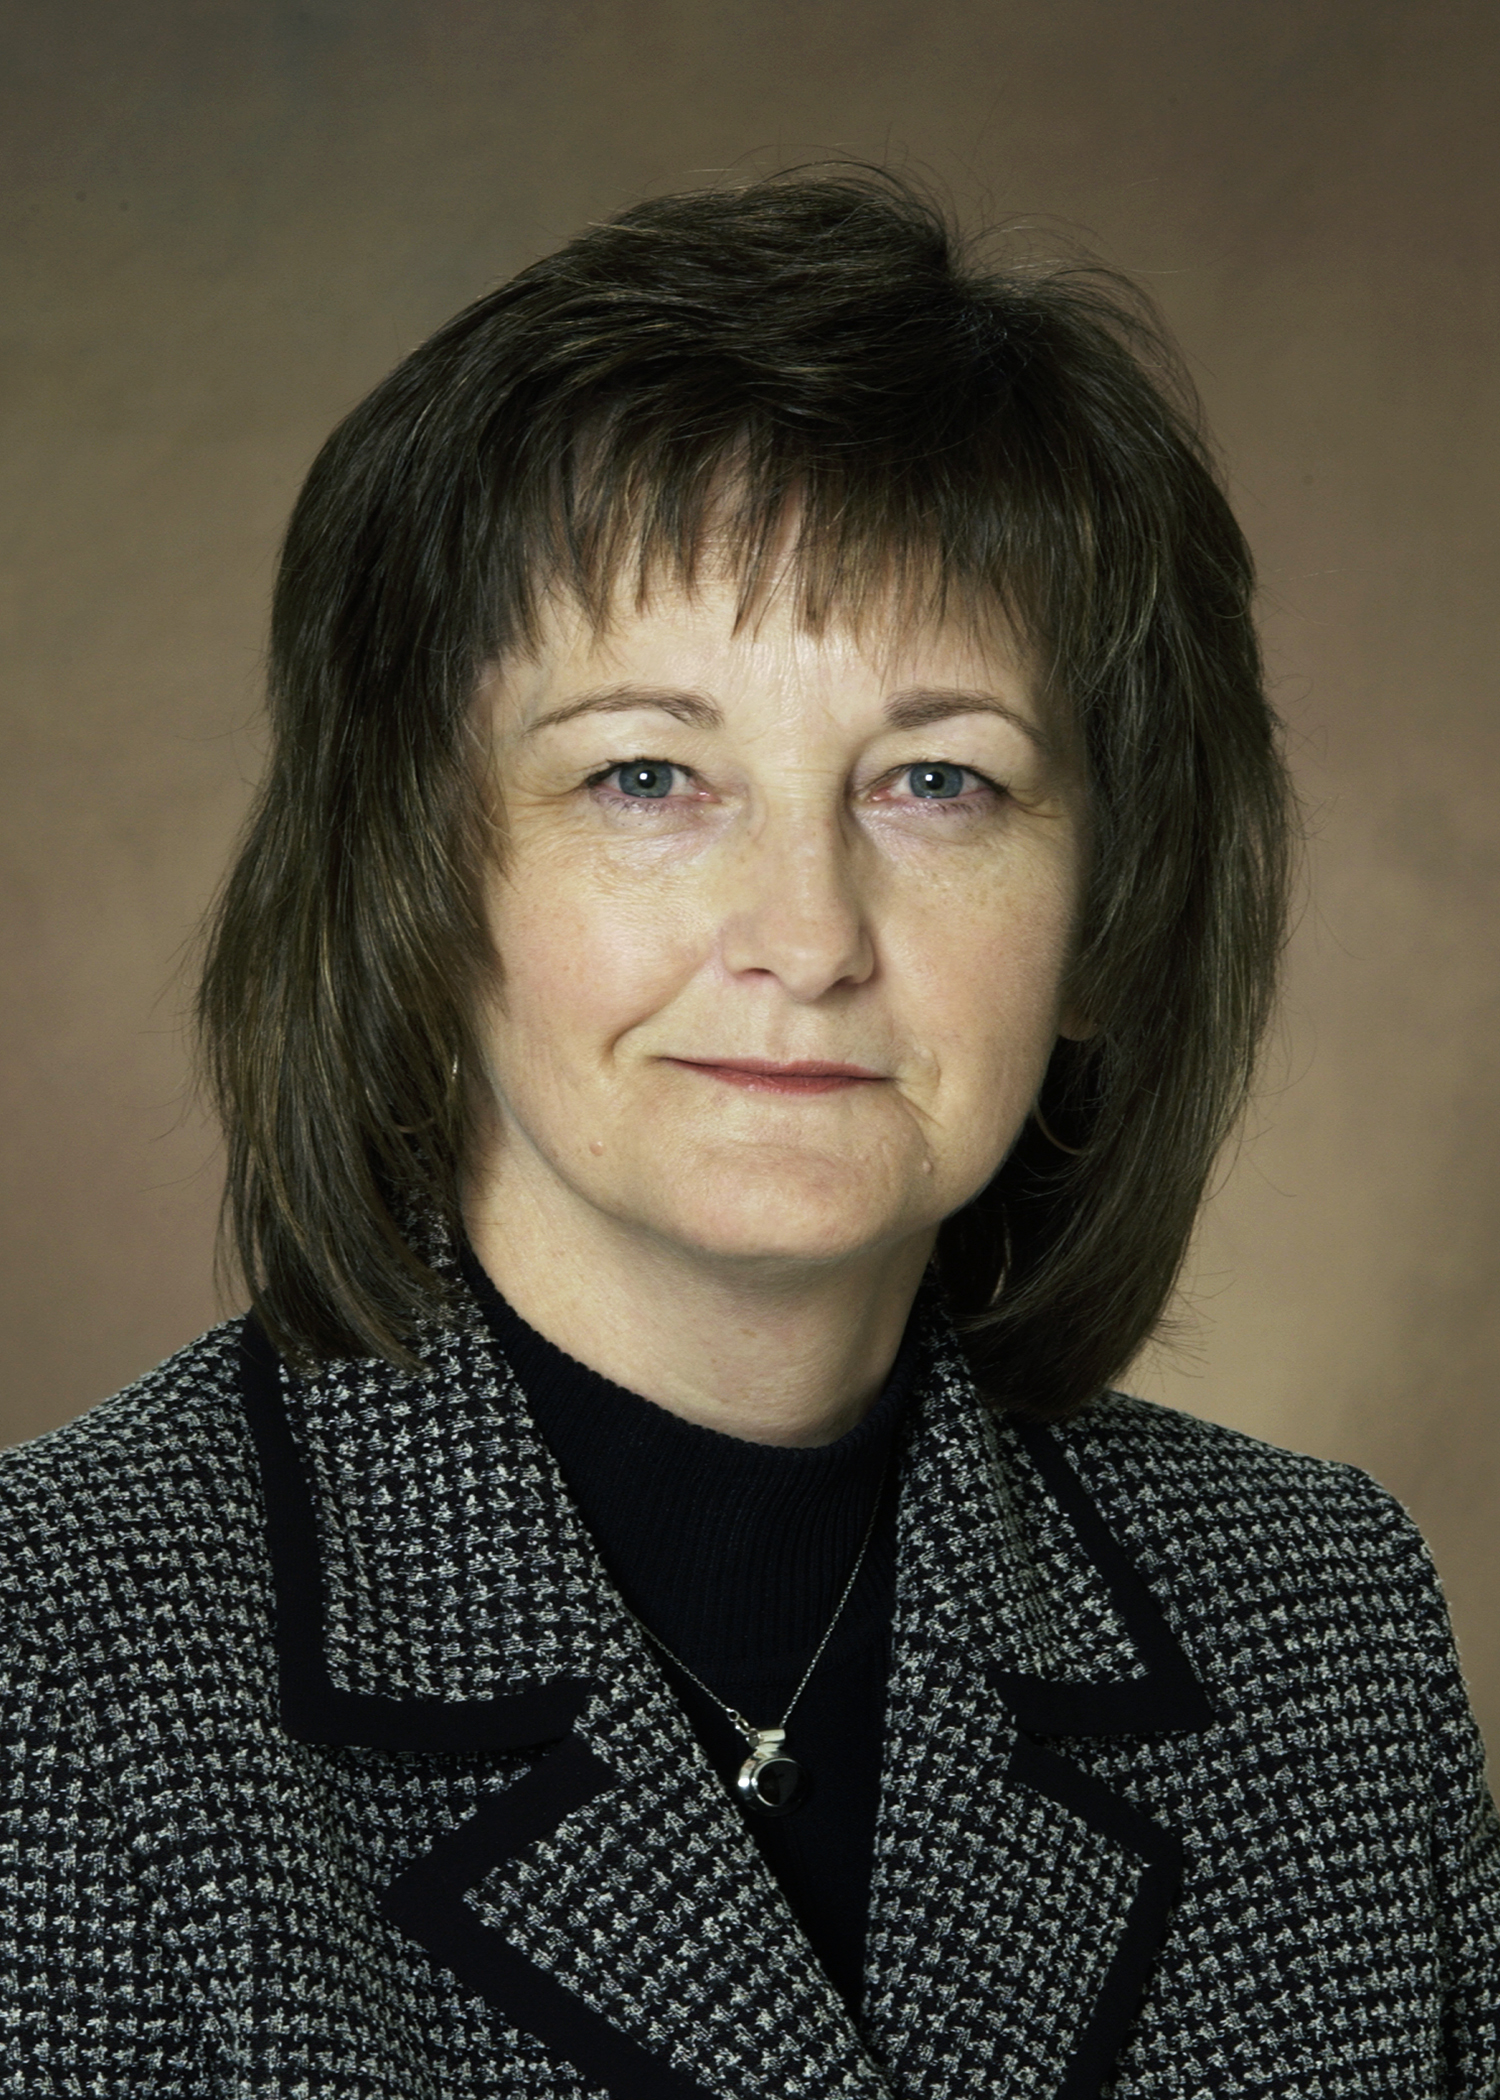 Kathleen Tweeten, director of the NDSU Extension Service's Center for Community Vitality, receives the North Central Region Distinguished Service Award.